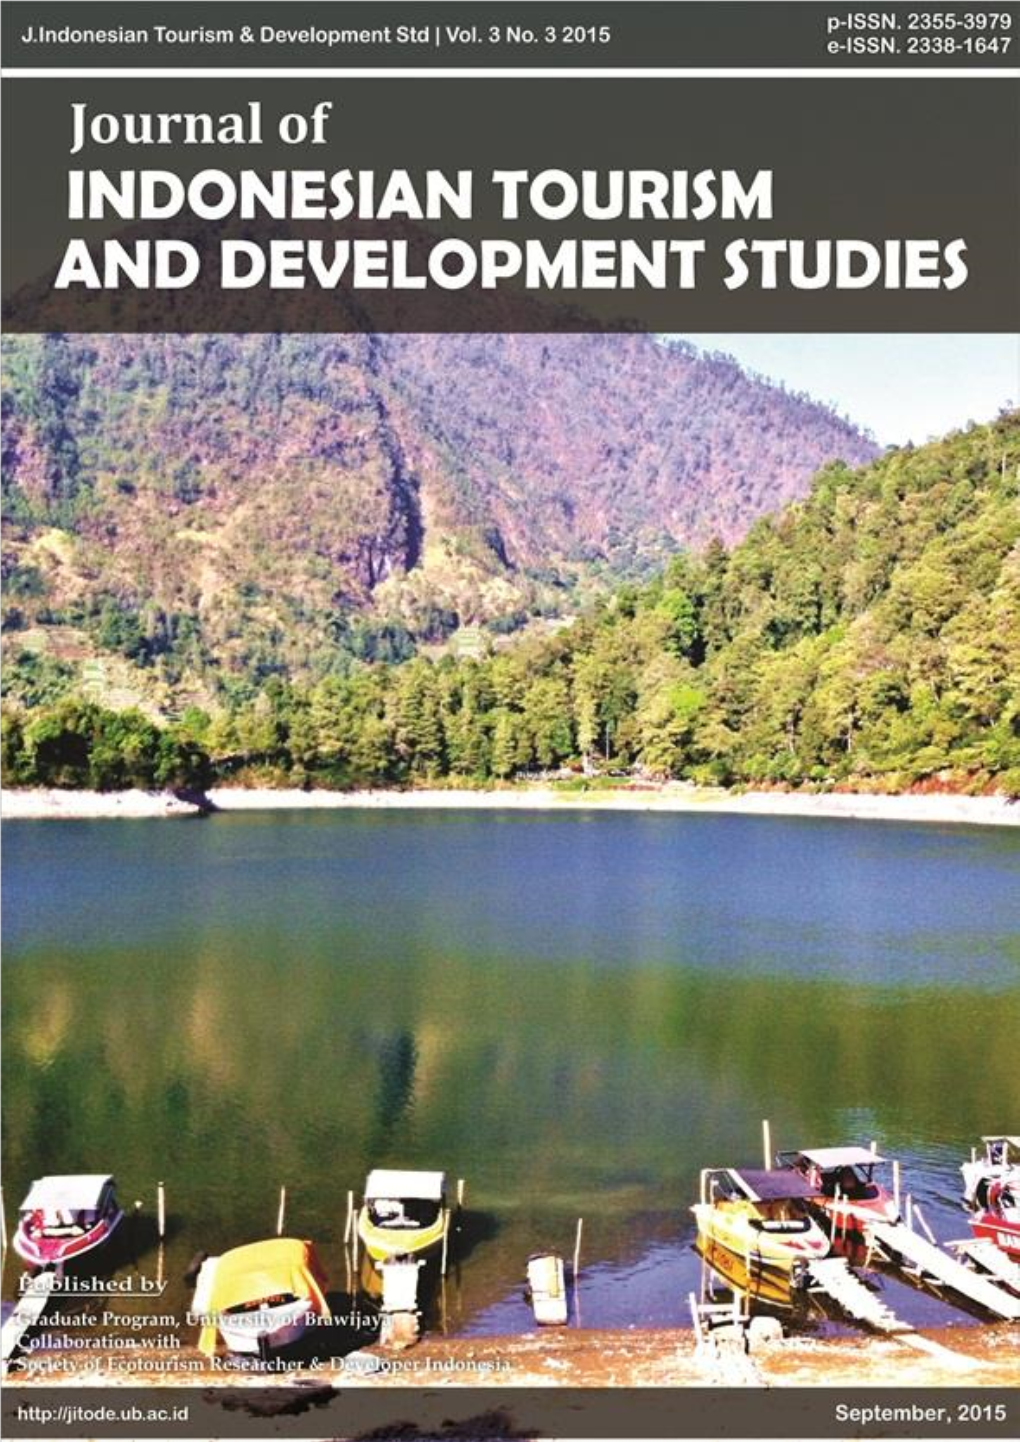 Journal of Indonesian Tourism and Development Studies